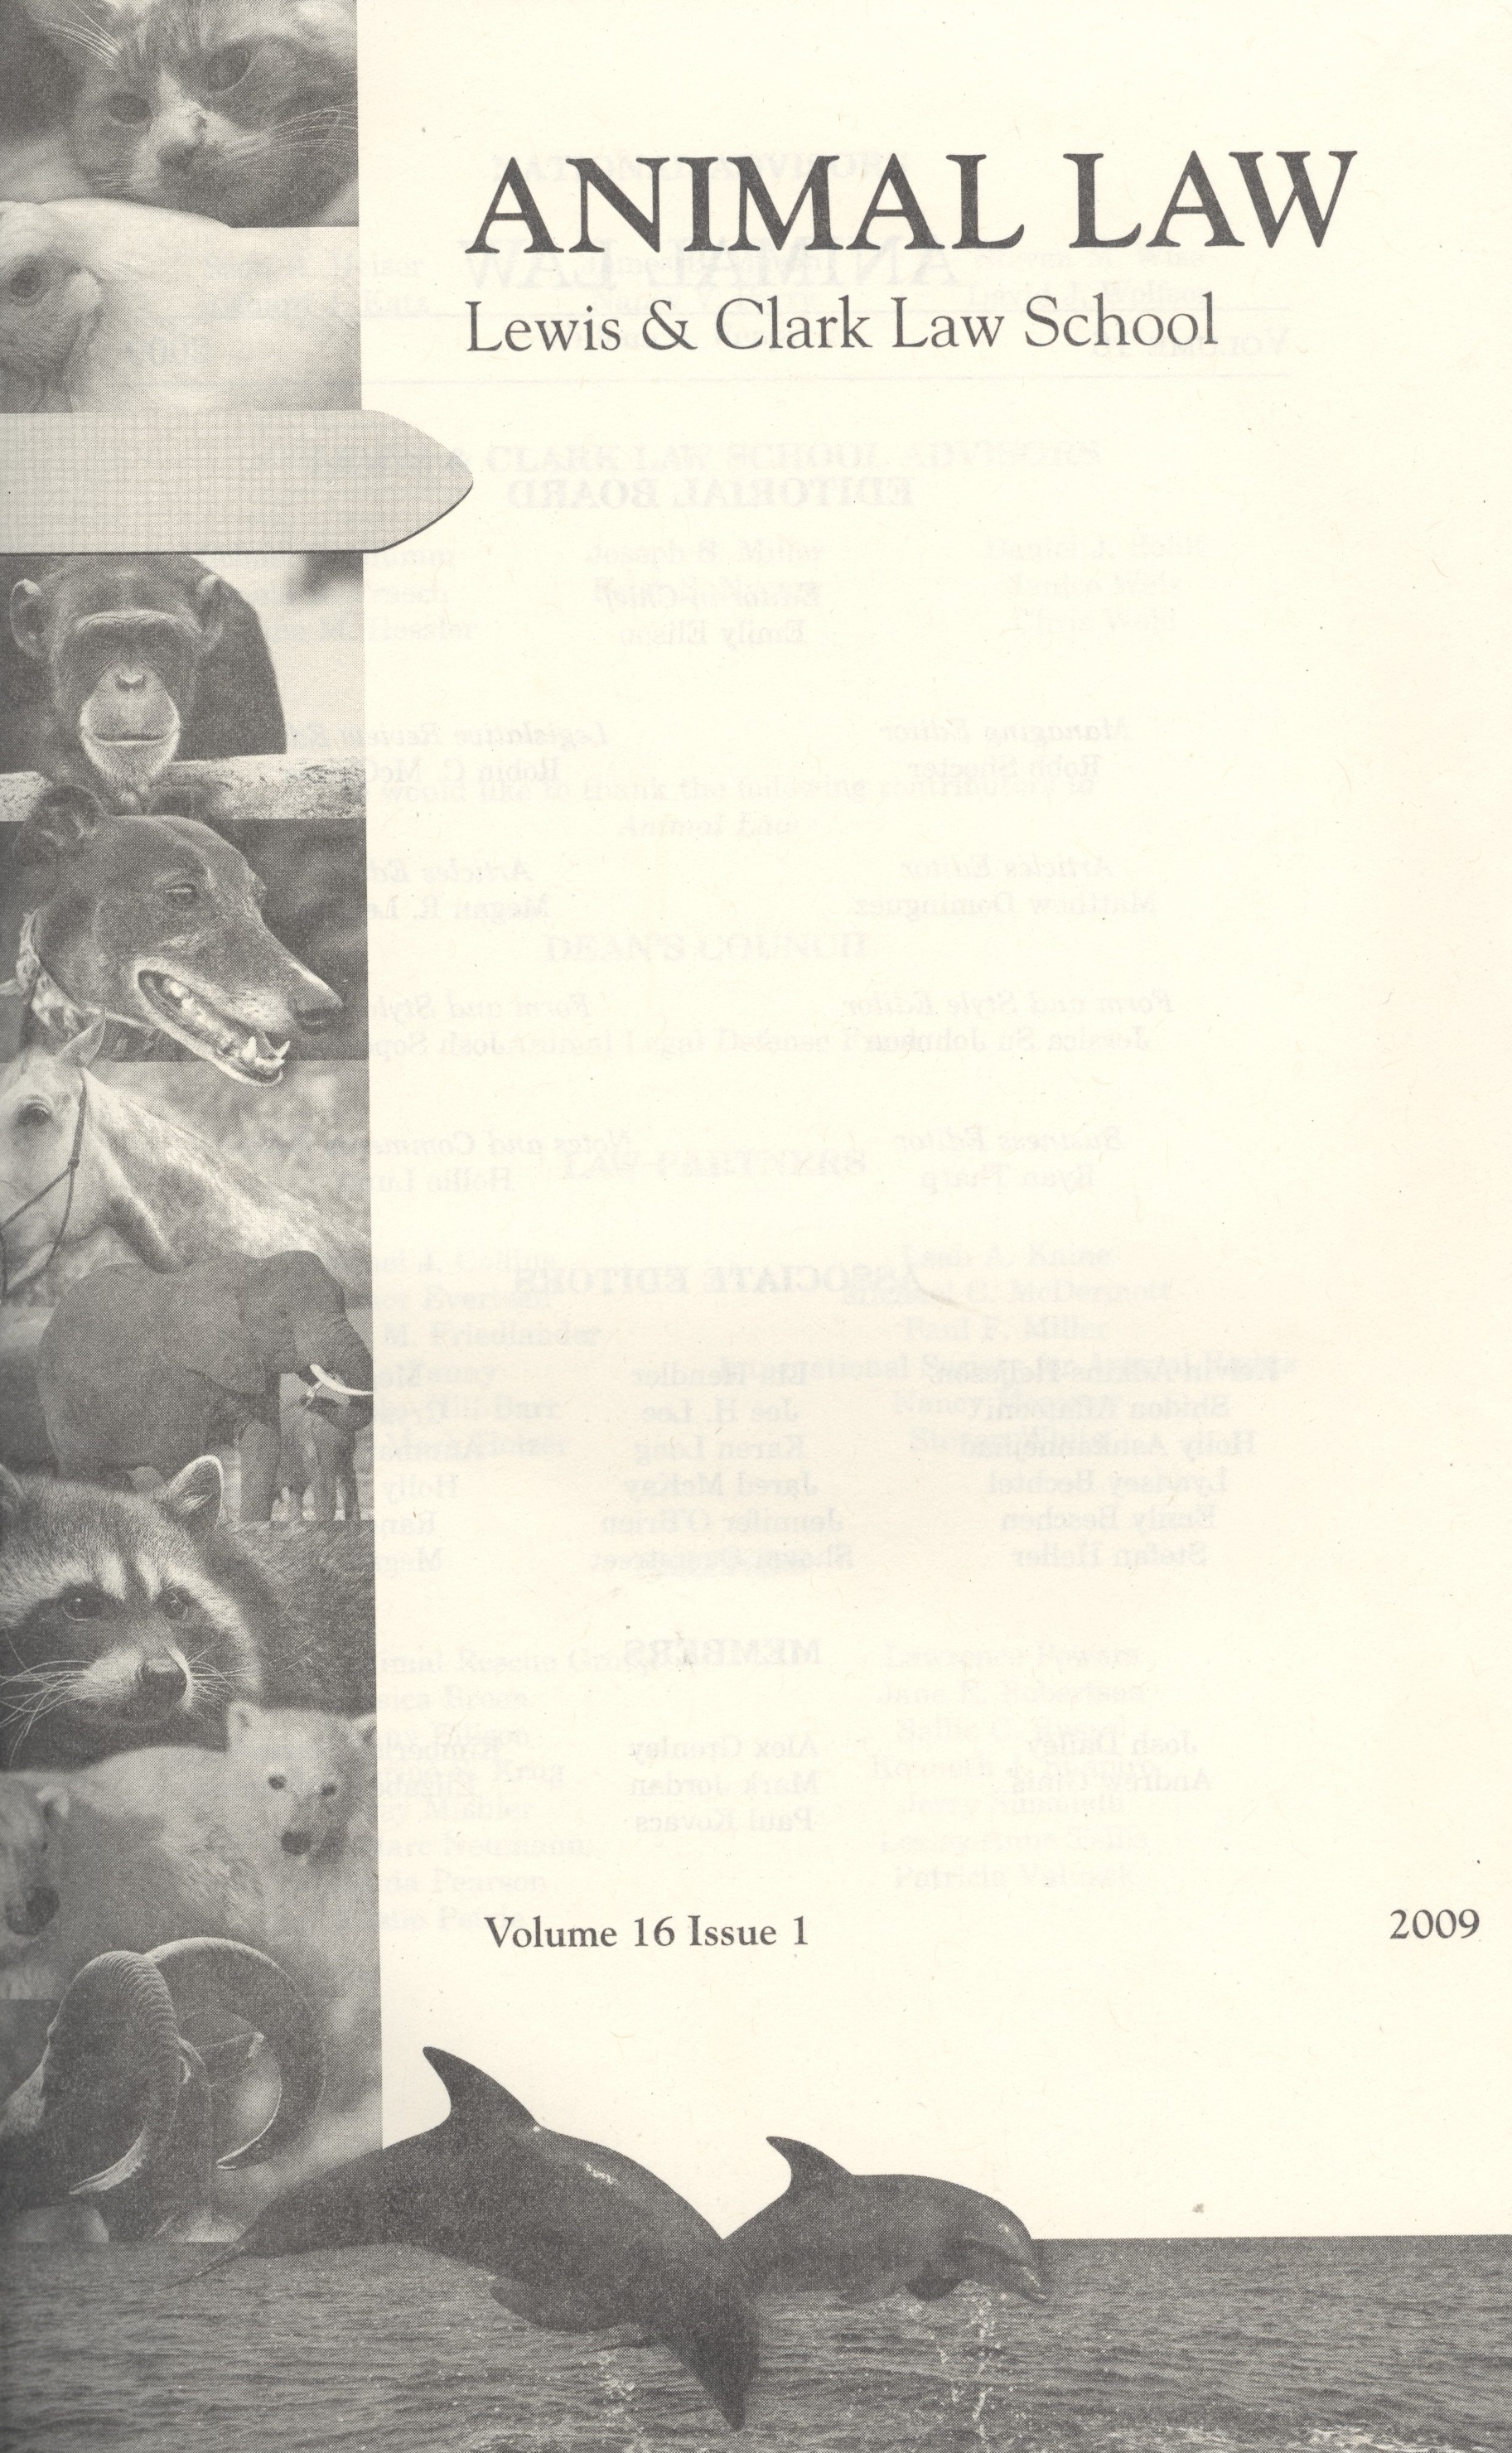 Cover of Animal Law Review Volume 16, Issue 1, 2009